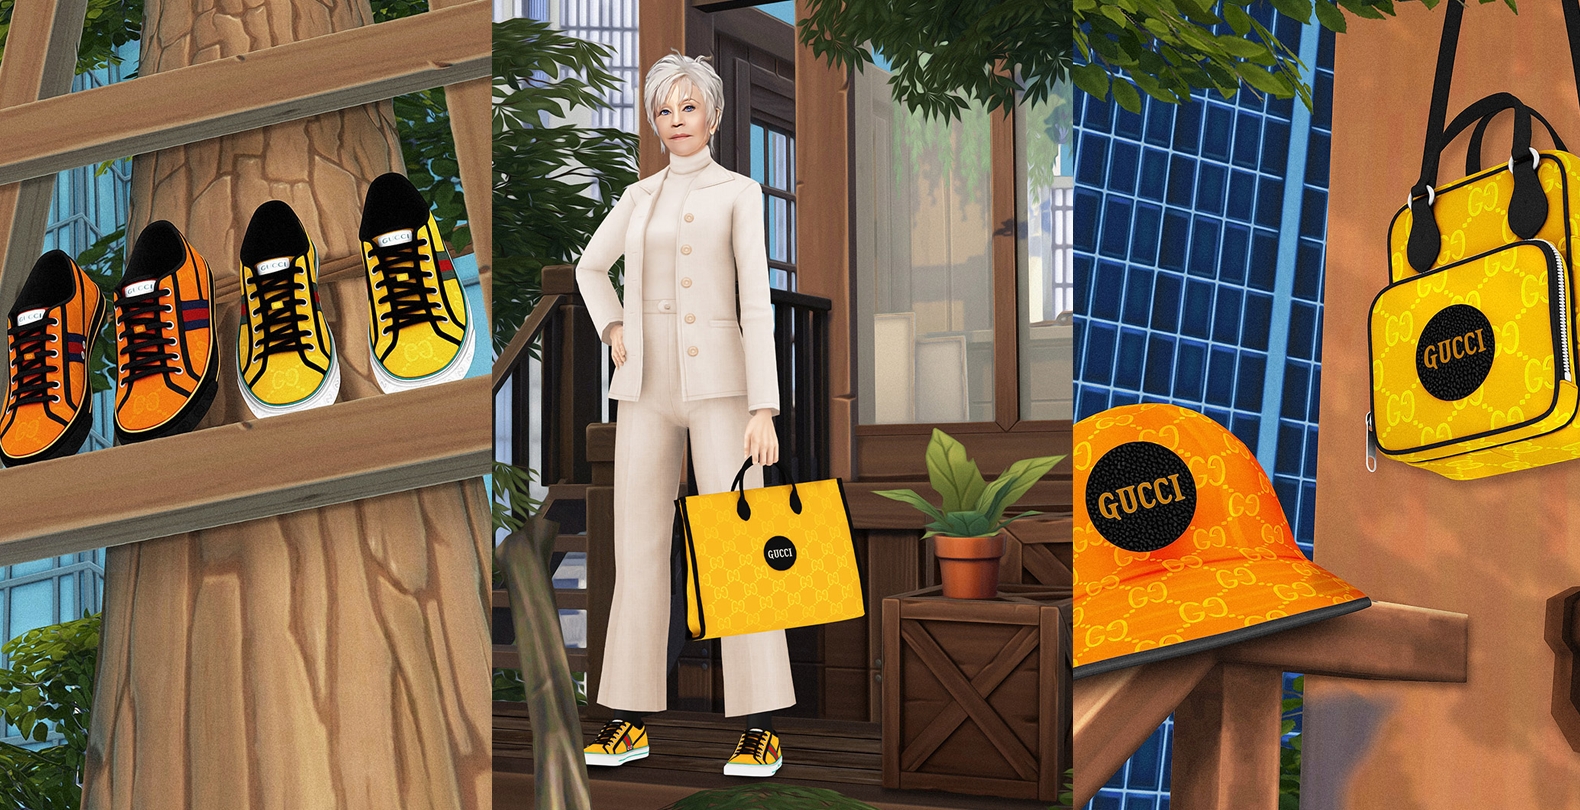 Gucci Partners With The Sims 4 Custom Content Creators For “Off the Grid” Campaign